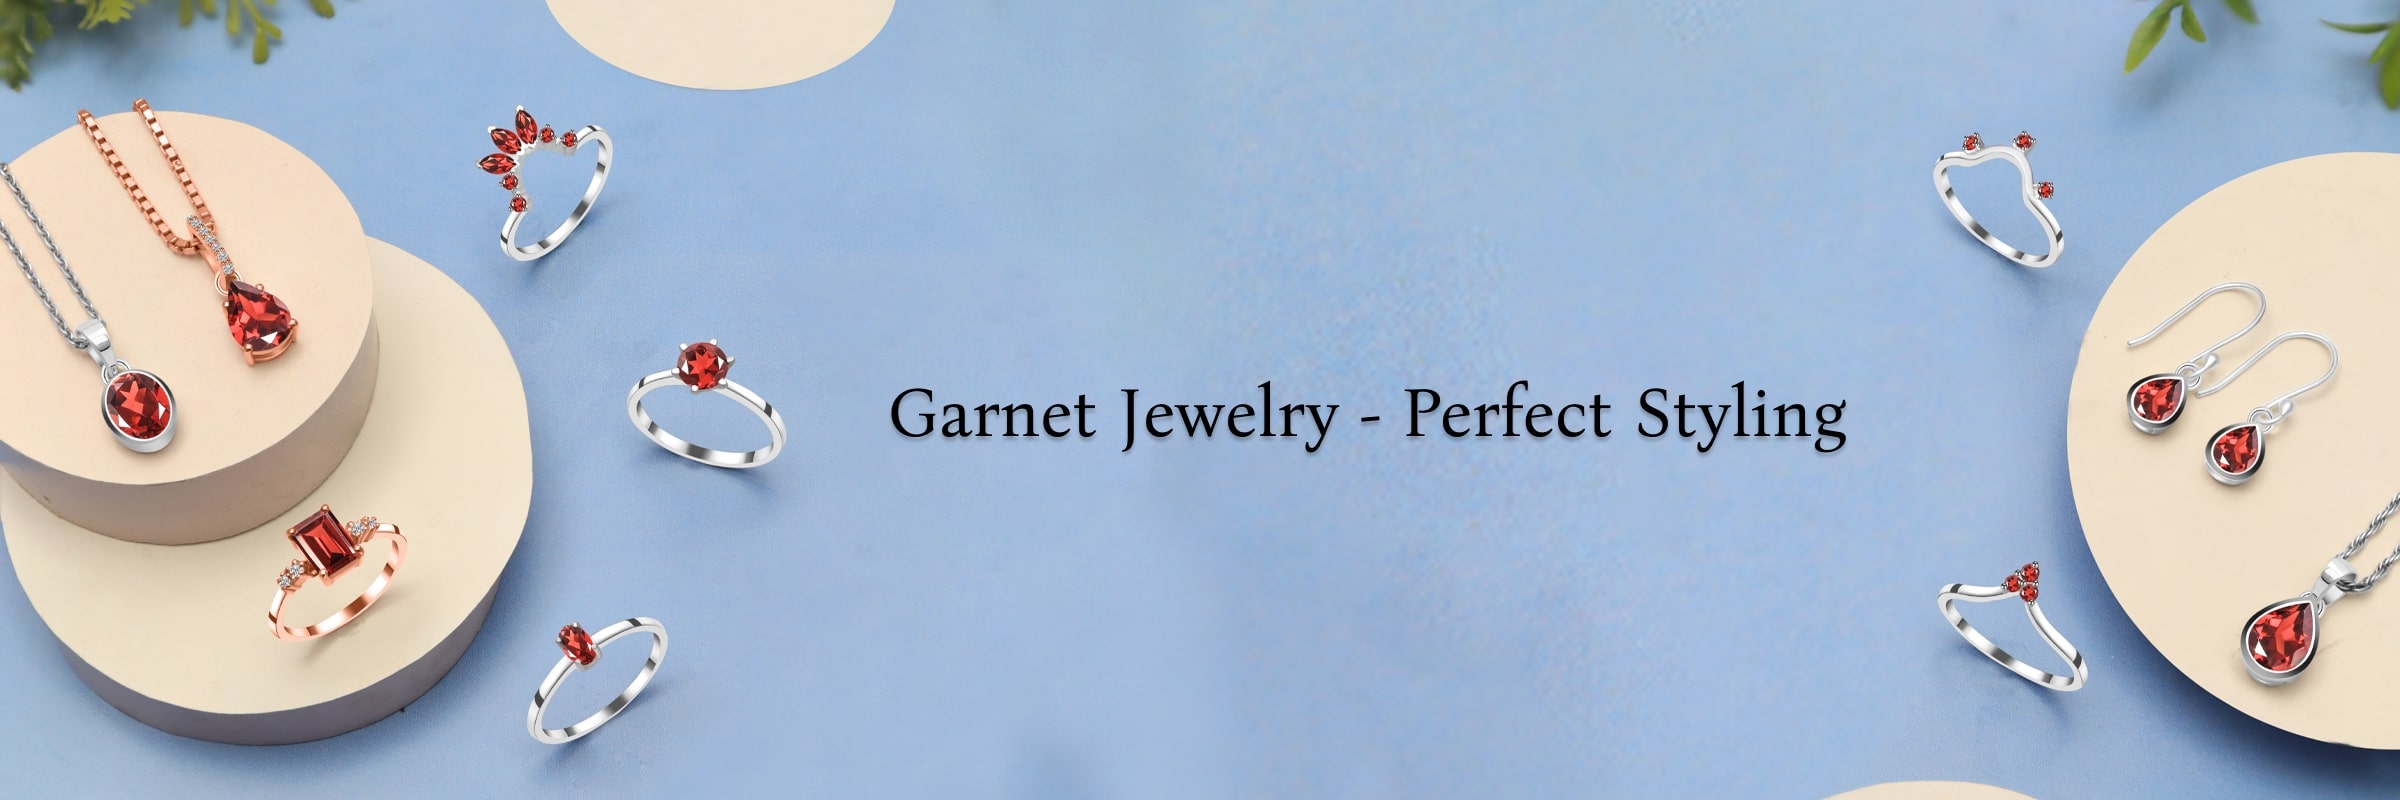 Styling and Adorning Garnet Jewelry